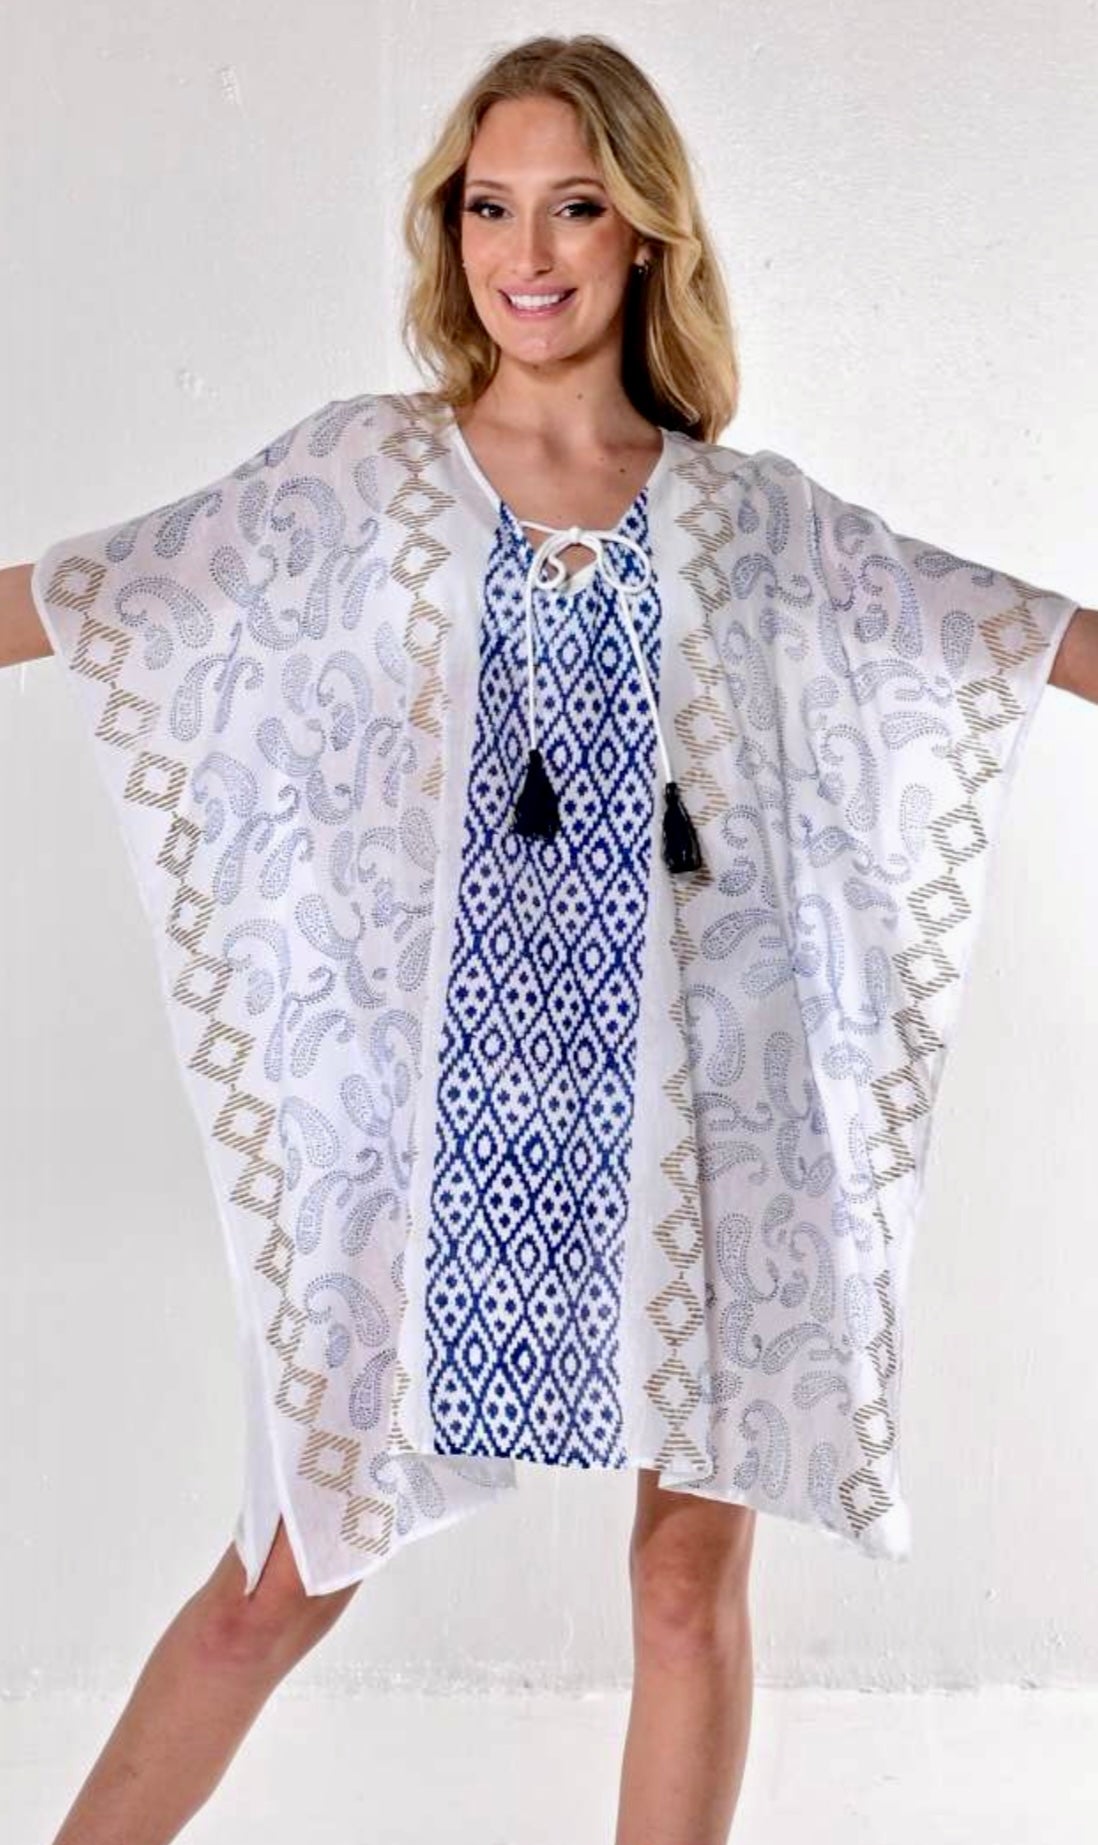 White, blue and gold tunic.